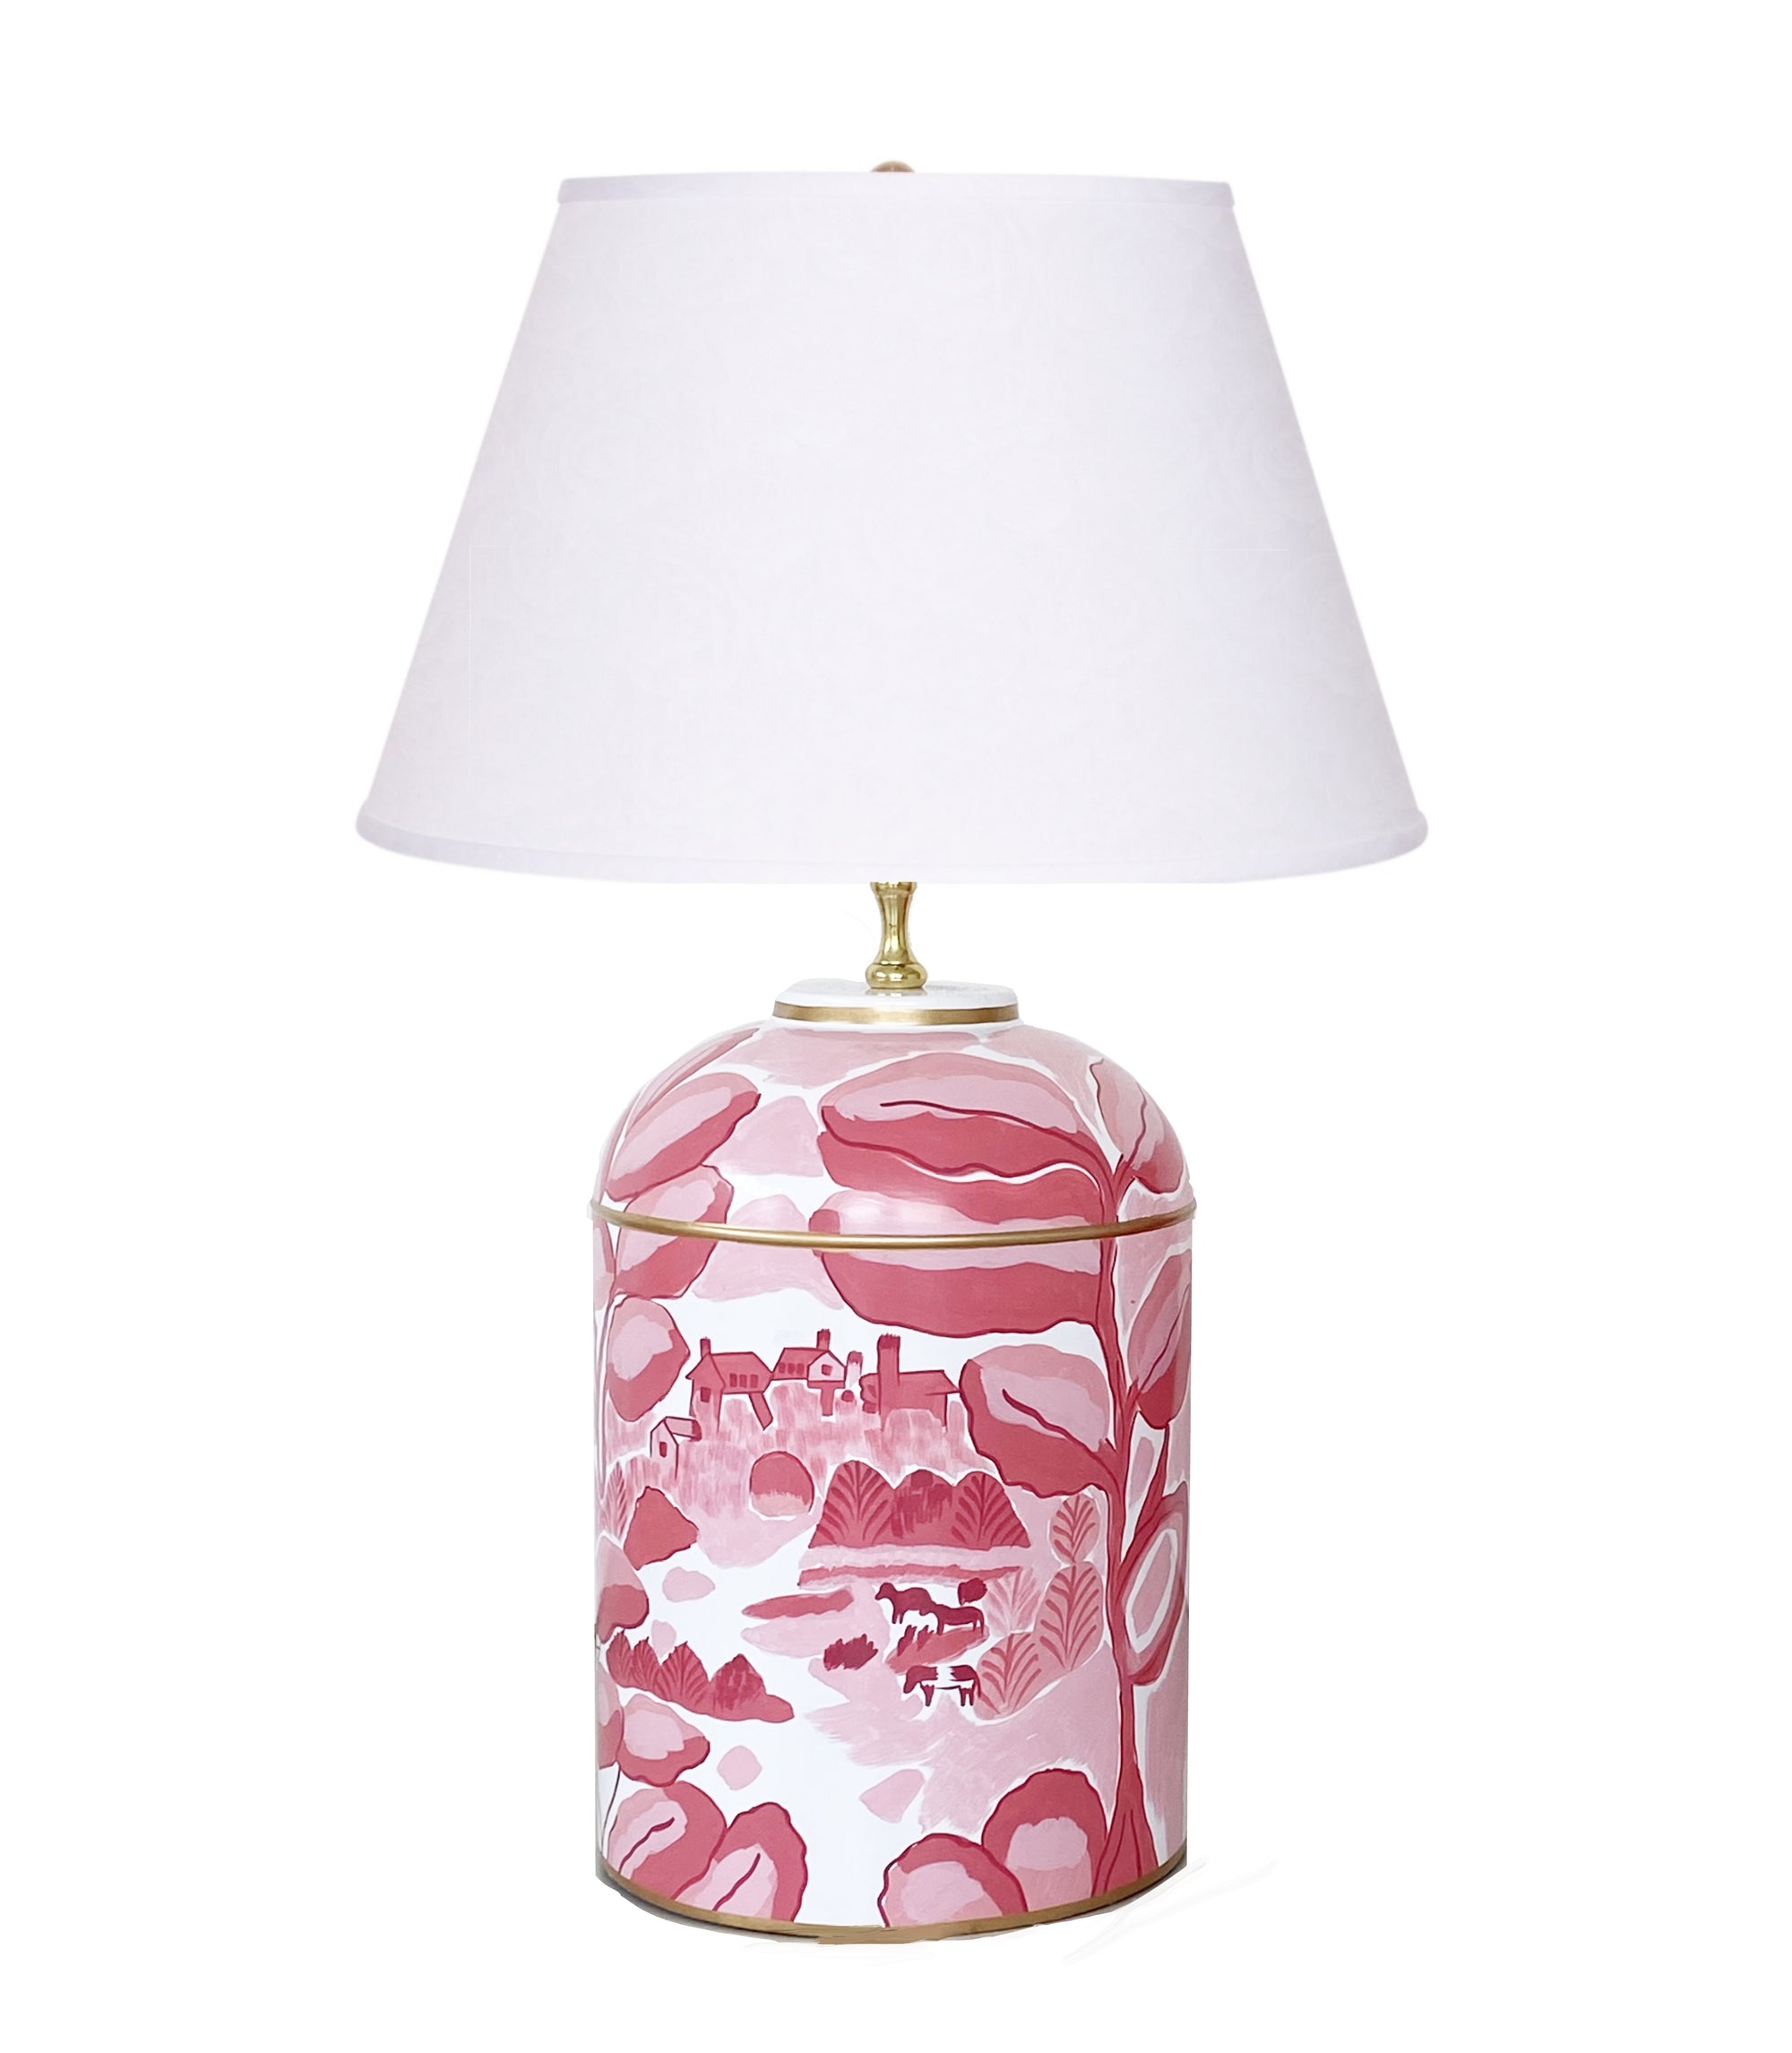 Bristow in Pink Tea Caddy Lamp by Dana Gibson